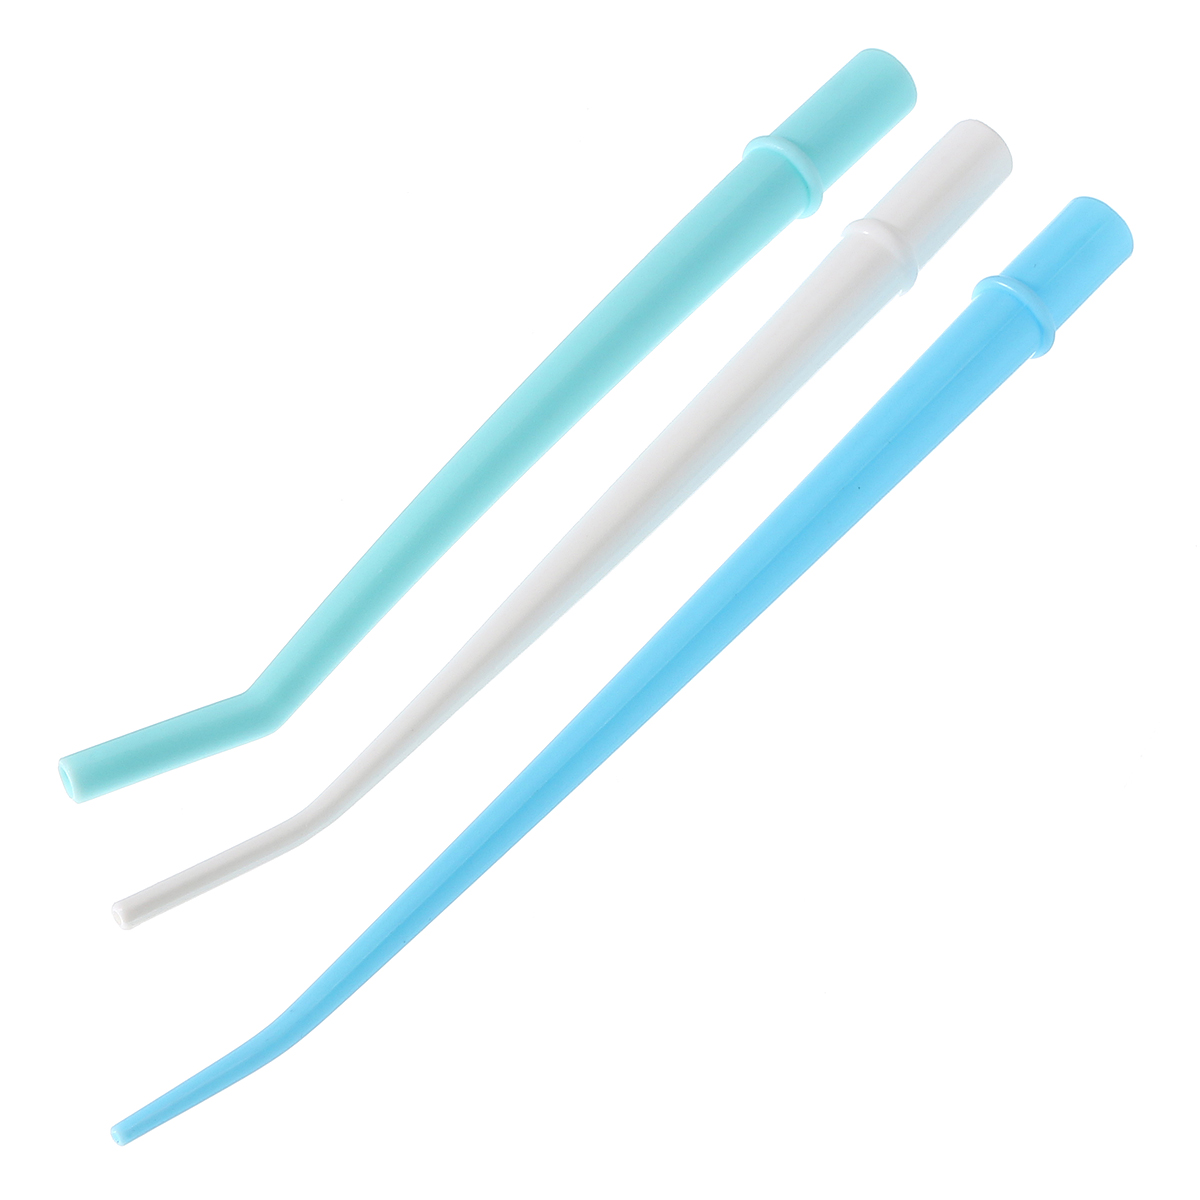 Plastic-Curved-Tips-Surgical-Aspirator-Dental-Tools-Saliva-Ejector-Tips-Disposable-Suction-Tube-1381854-5